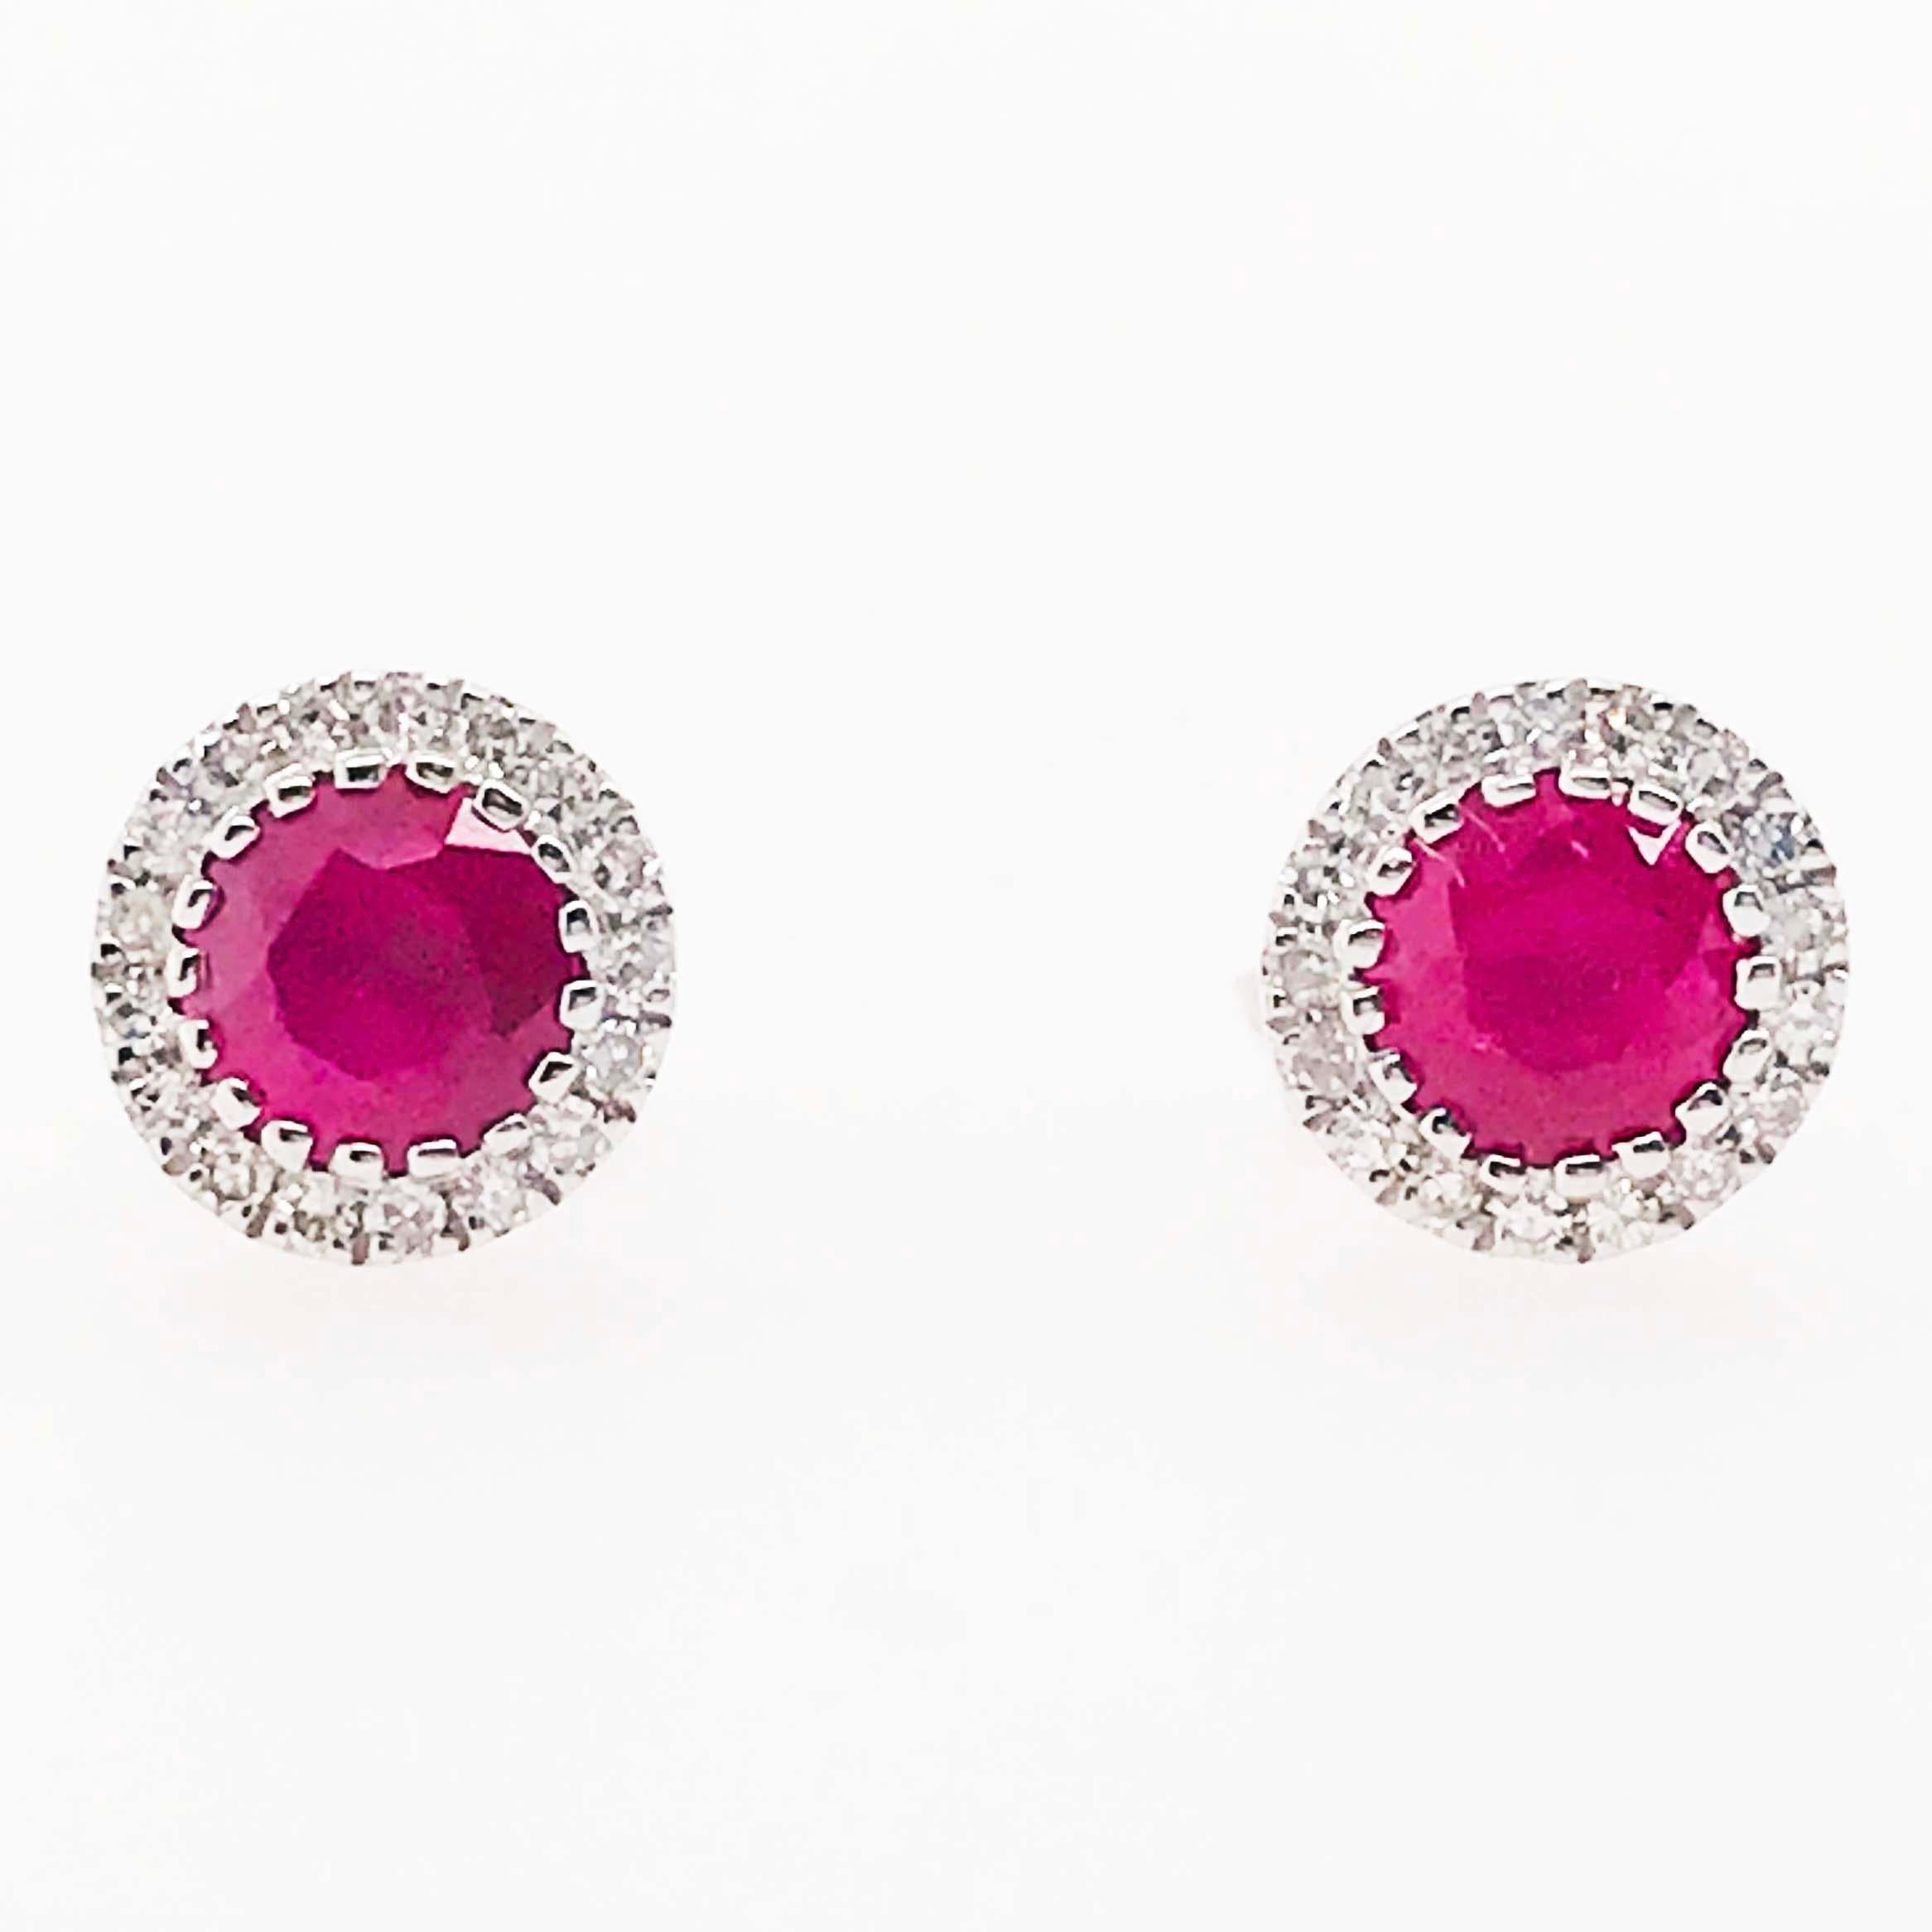 These genuine ruby and diamond earring studs are stunning! With a round, faceted shaped ruby gemstone set at the bottom of each earring, framed with a diamond halo that sparkles and compliments the ruby beautifully. These ruby stud earrings are